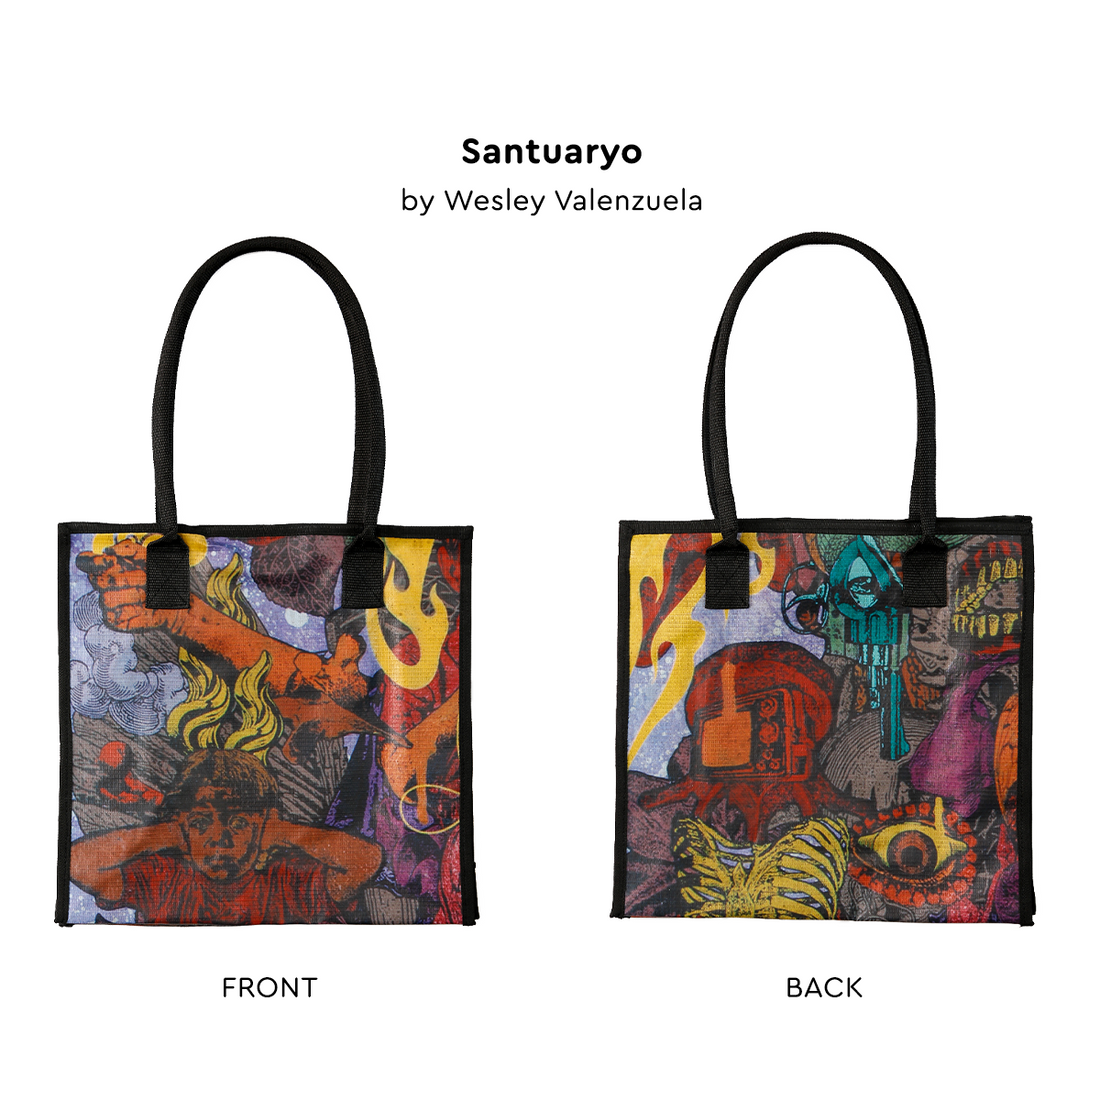 Upcycled Art Tote Bags